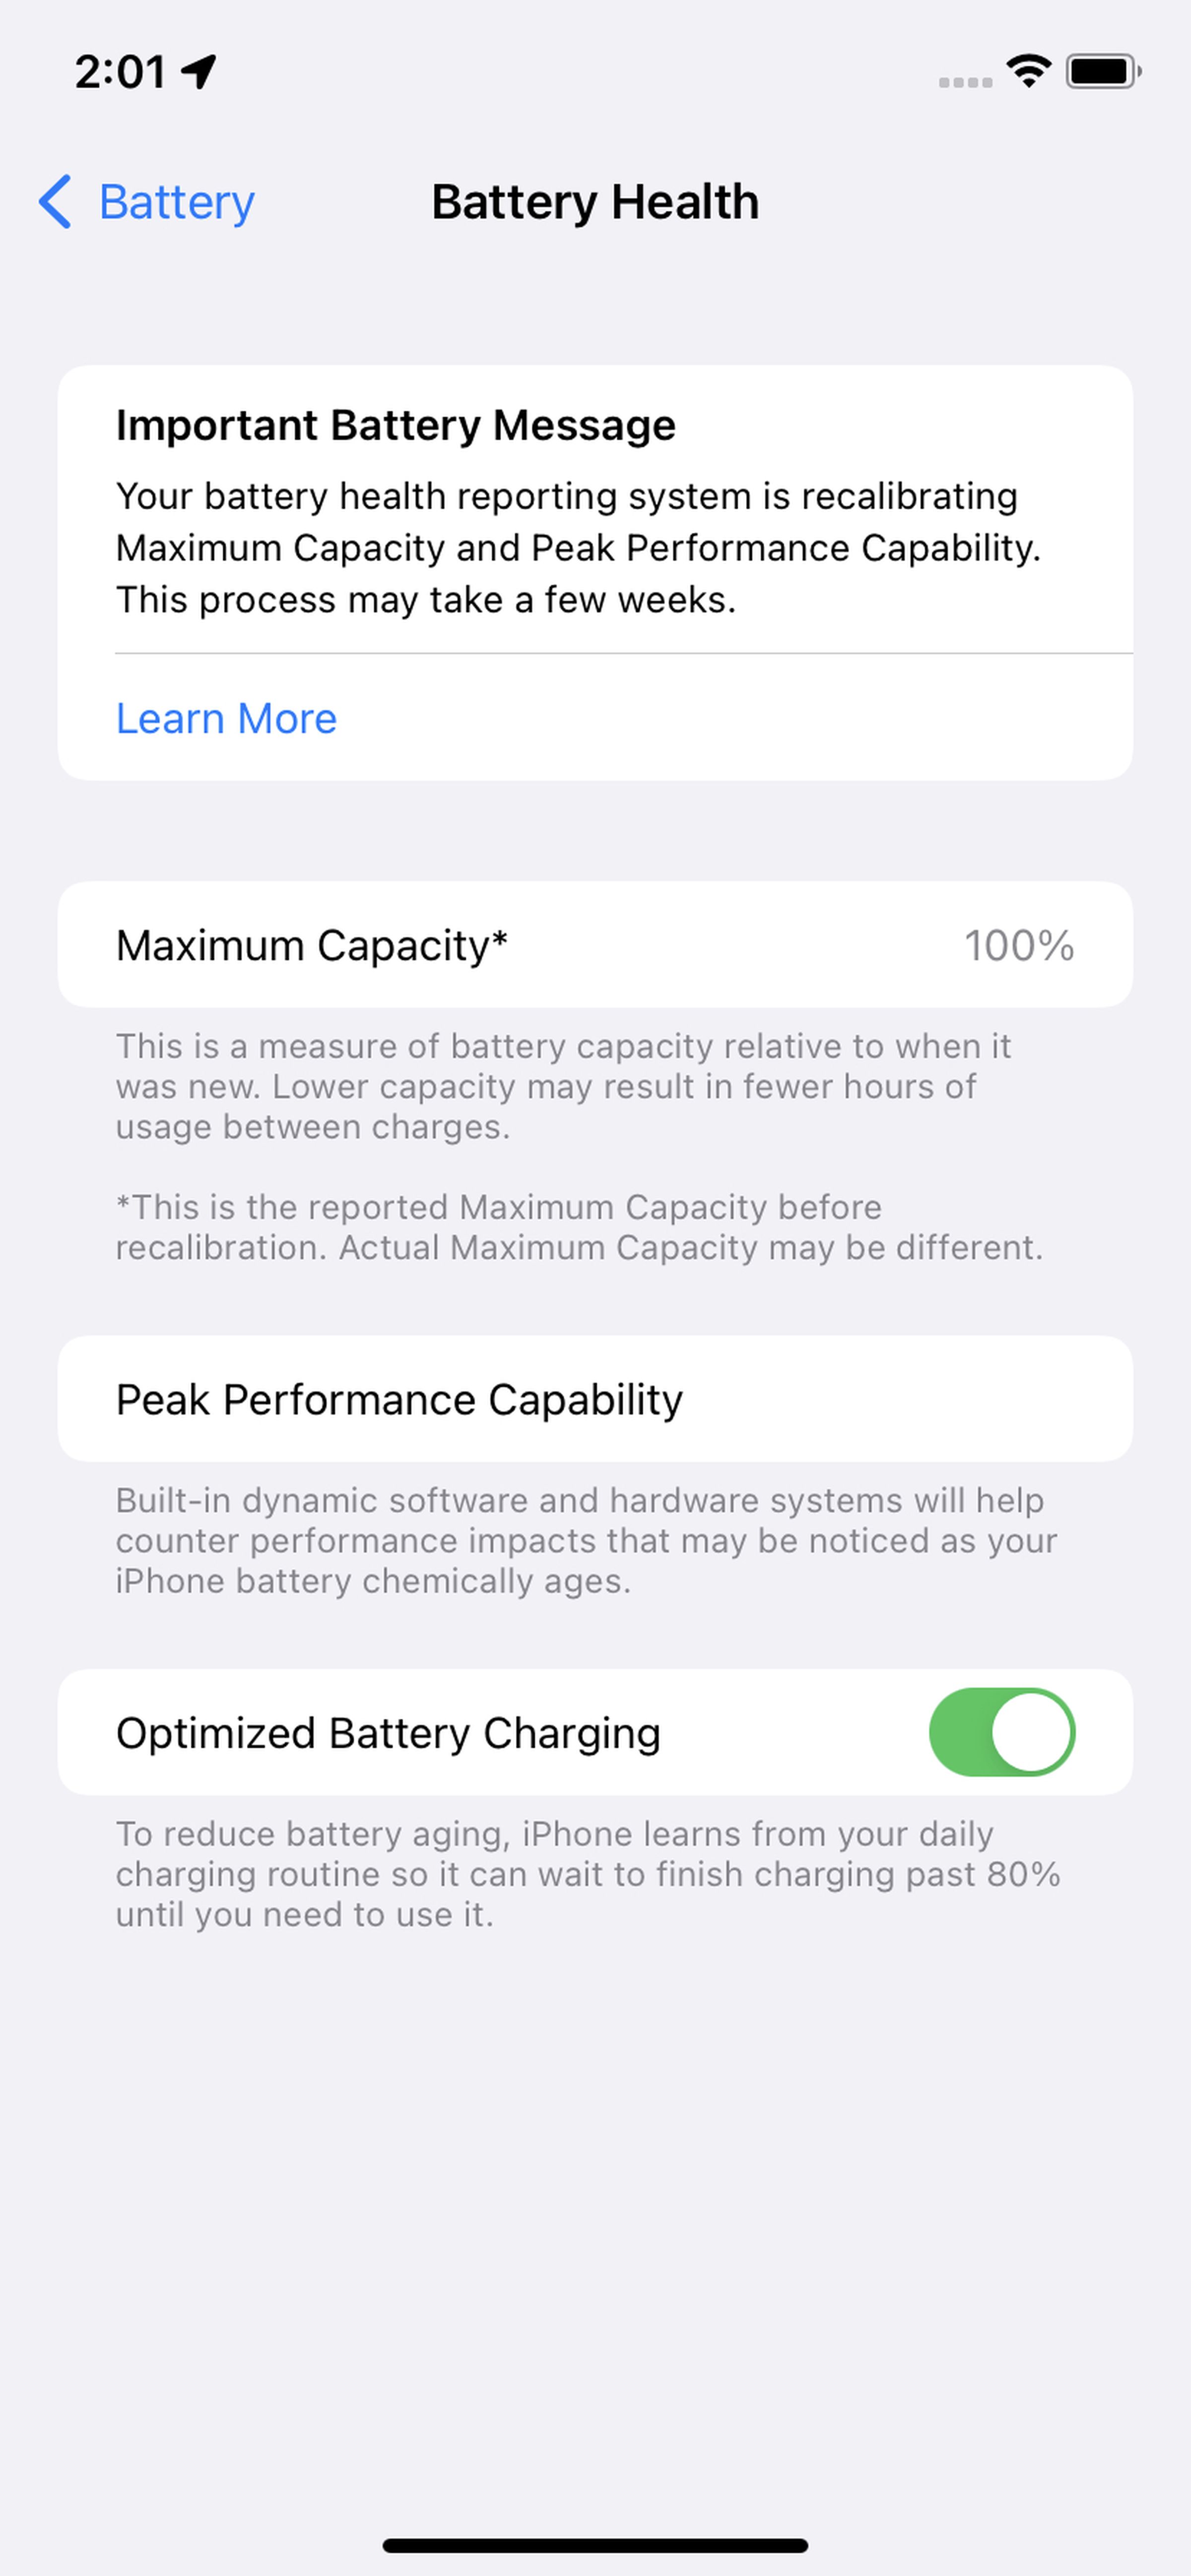 The “Battery Health” page will let you know if you need to replace your battery.